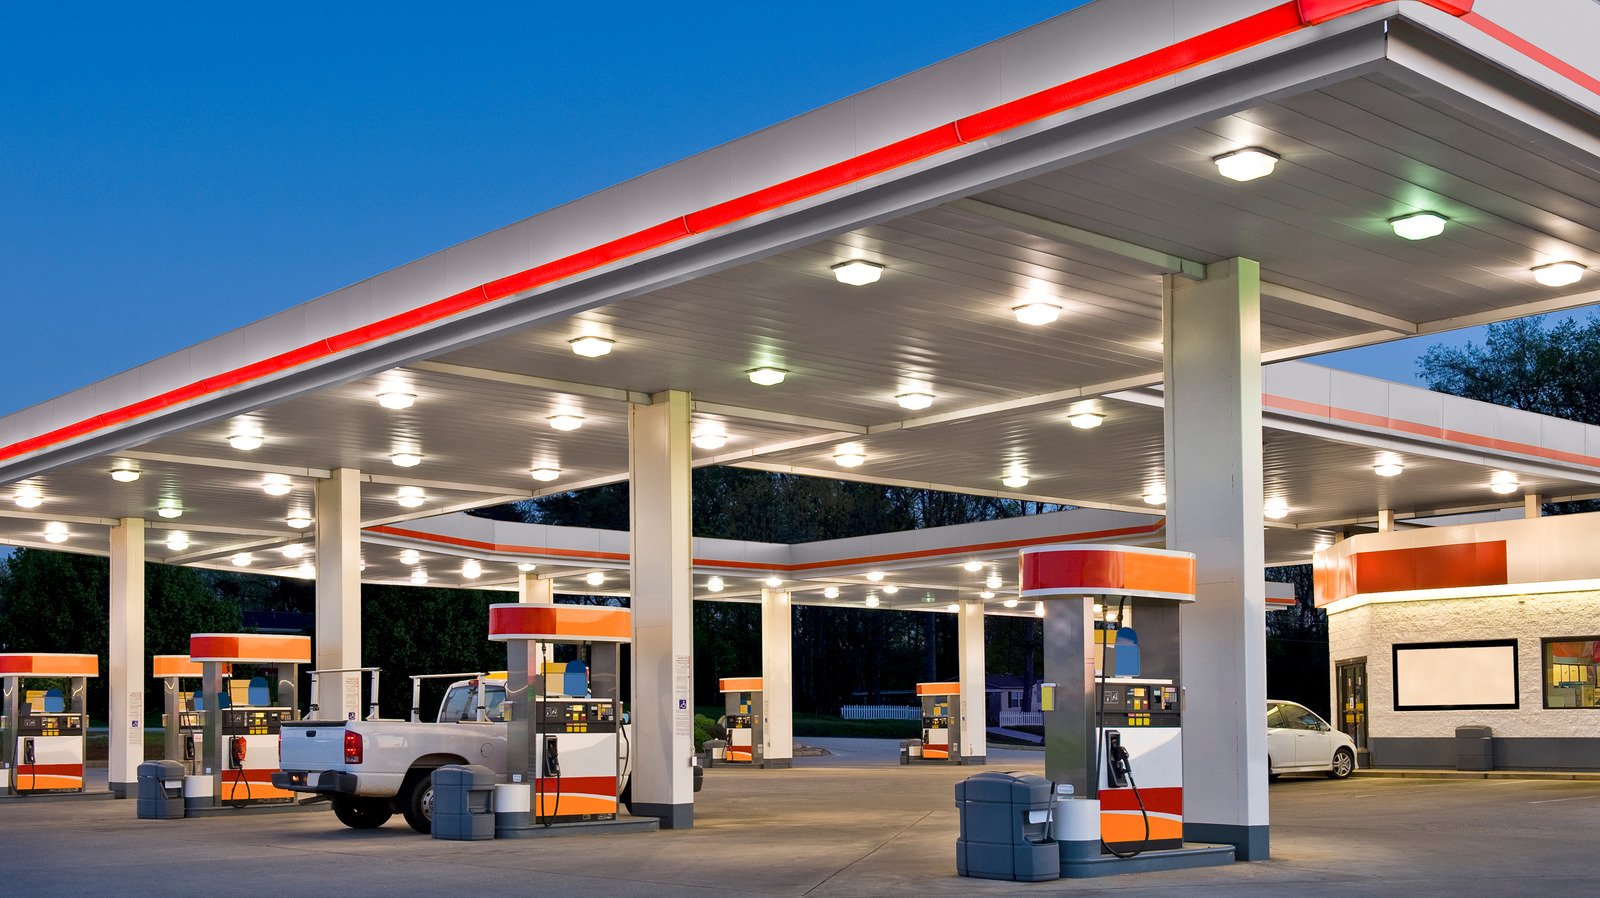 Over One-Third Of People Think This Gas Station Has The Best Food